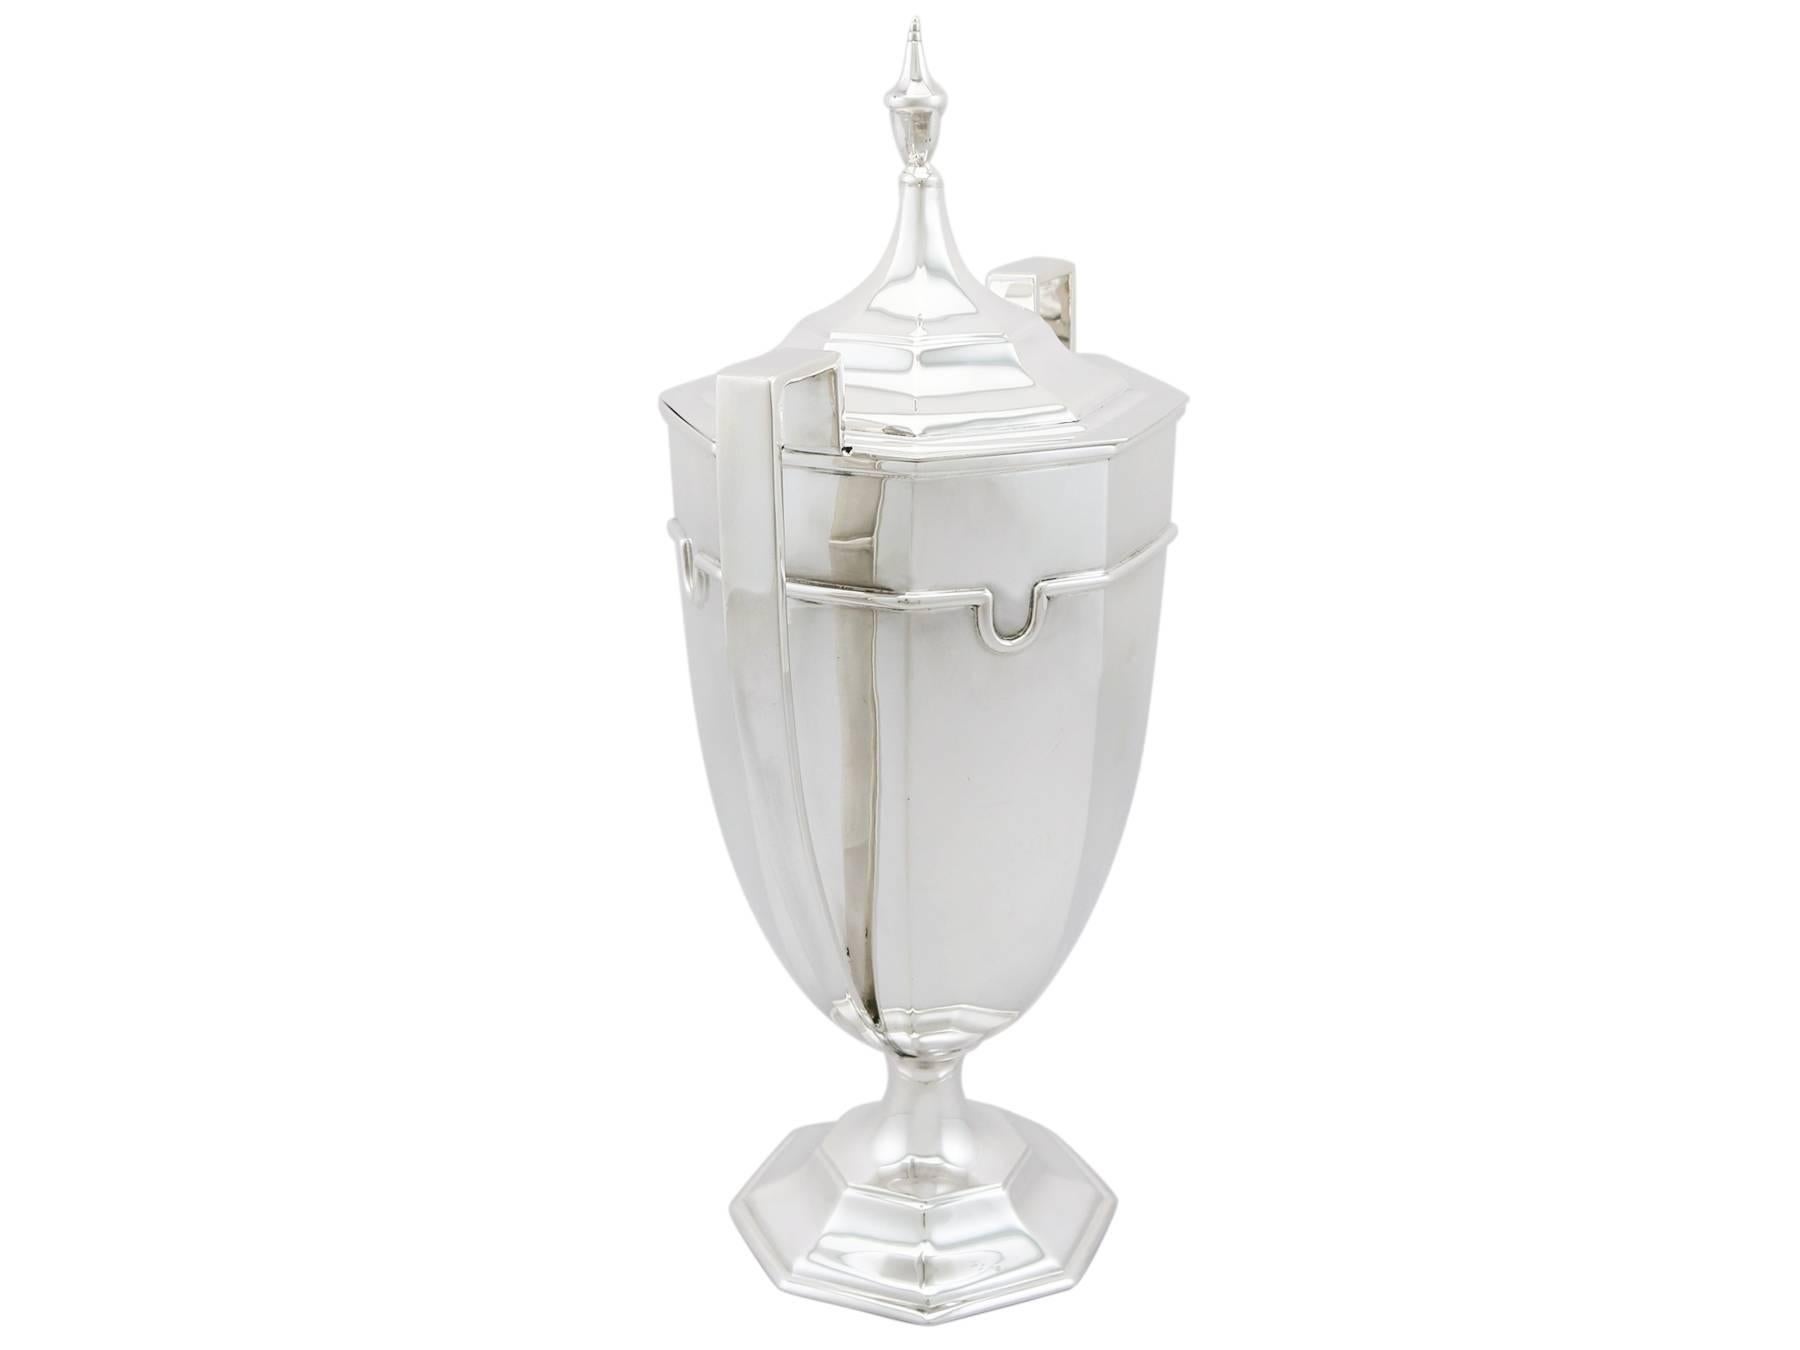 Early 20th Century Antique George V Sterling Silver Presentation Cup and Cover by Mappin & Webb Ltd